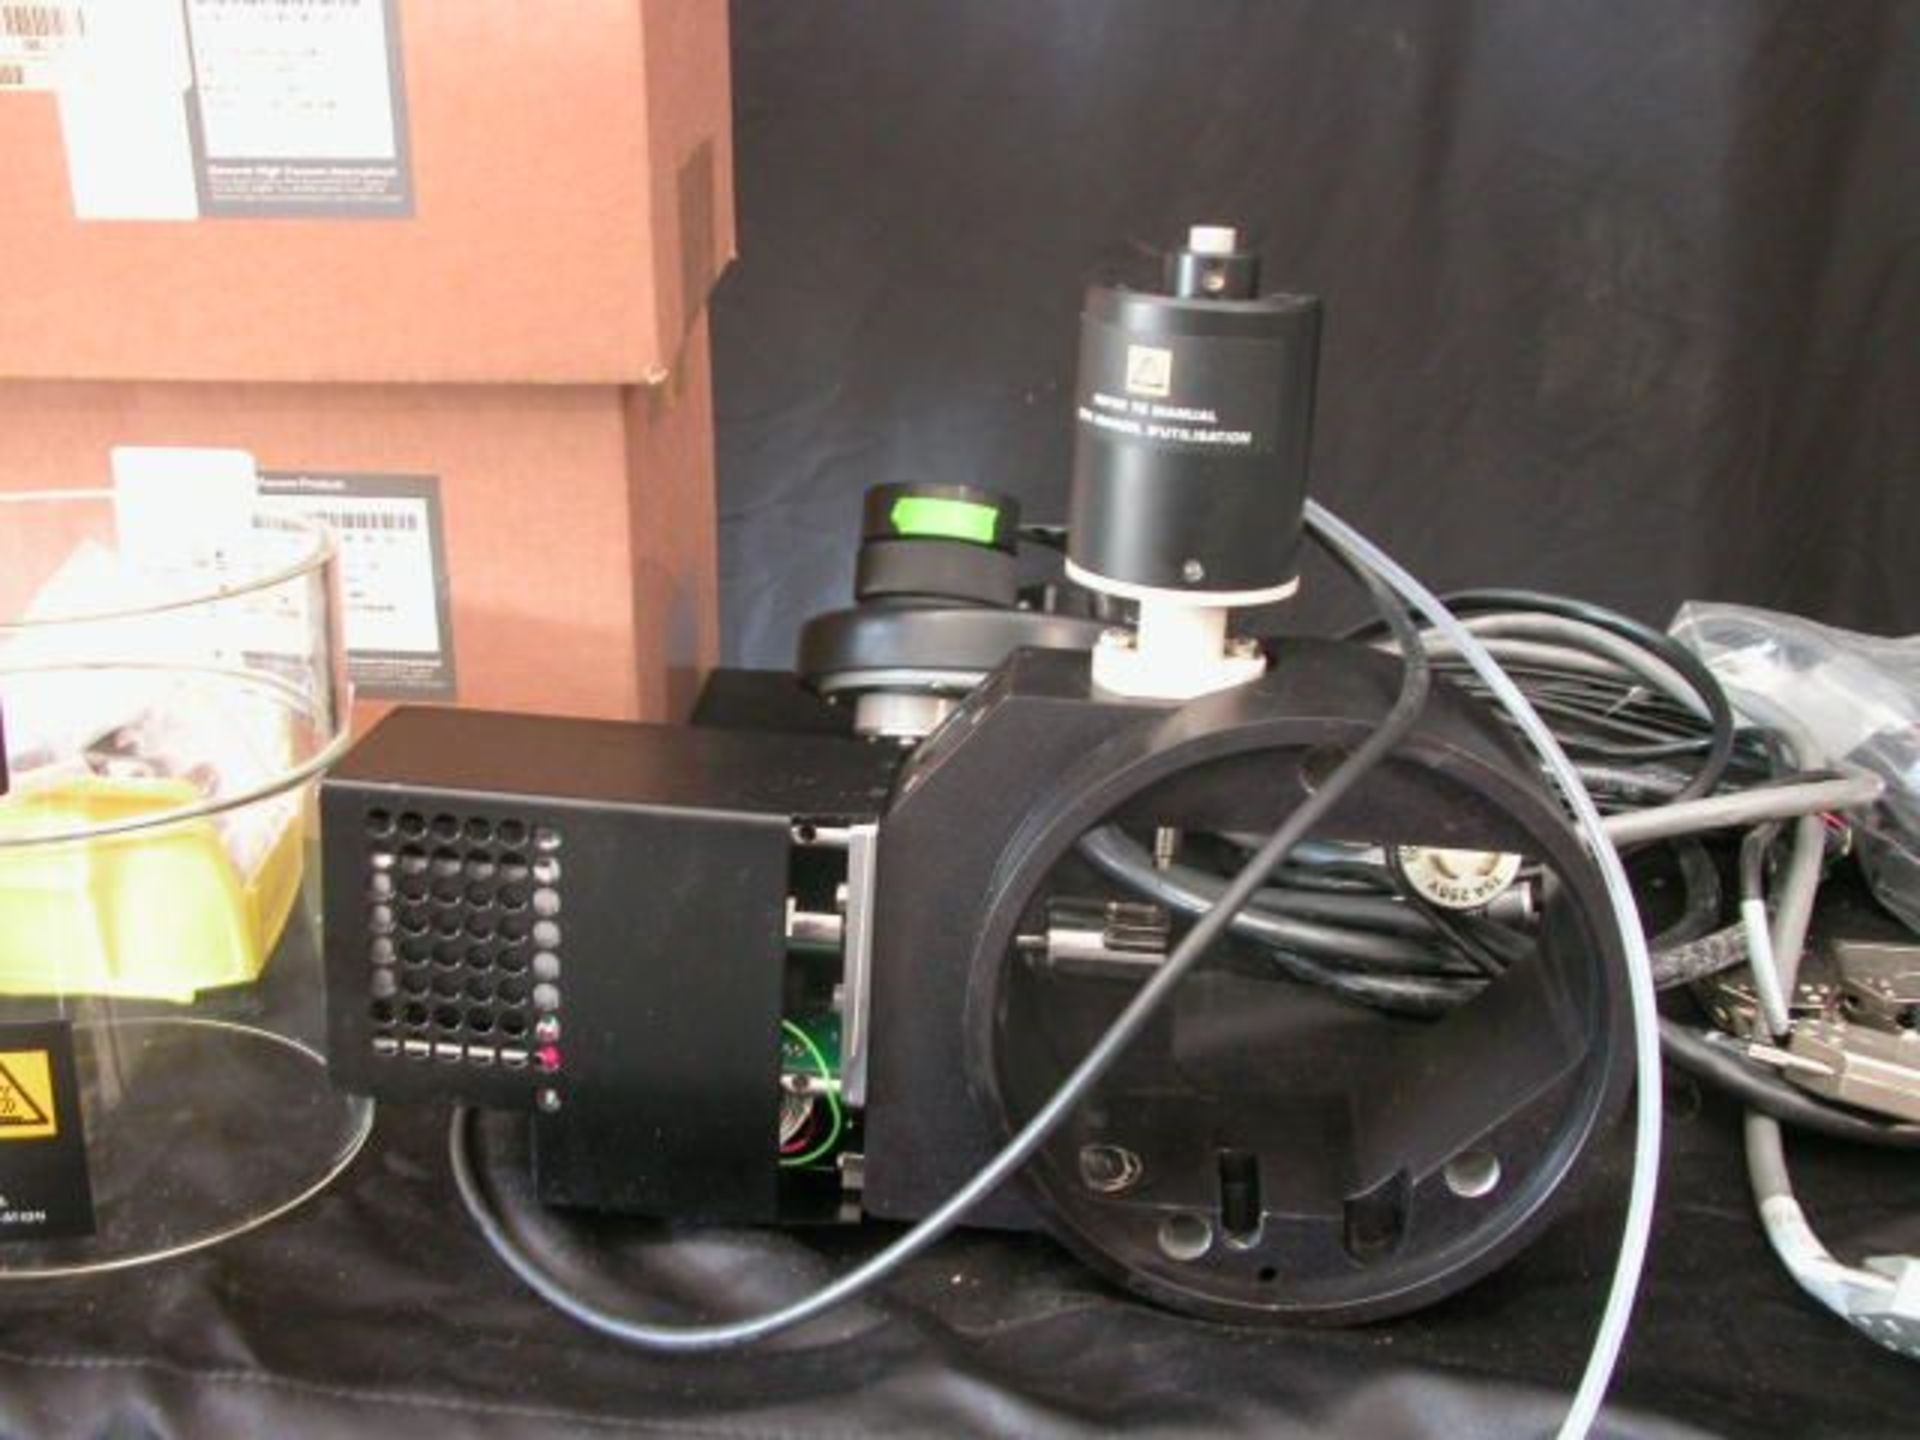 Waters/Micromass Q-Tof Ultima Mass Spectrometer P.M. KIT W/ Extras, Qty 1, 321118842113 - Image 6 of 13